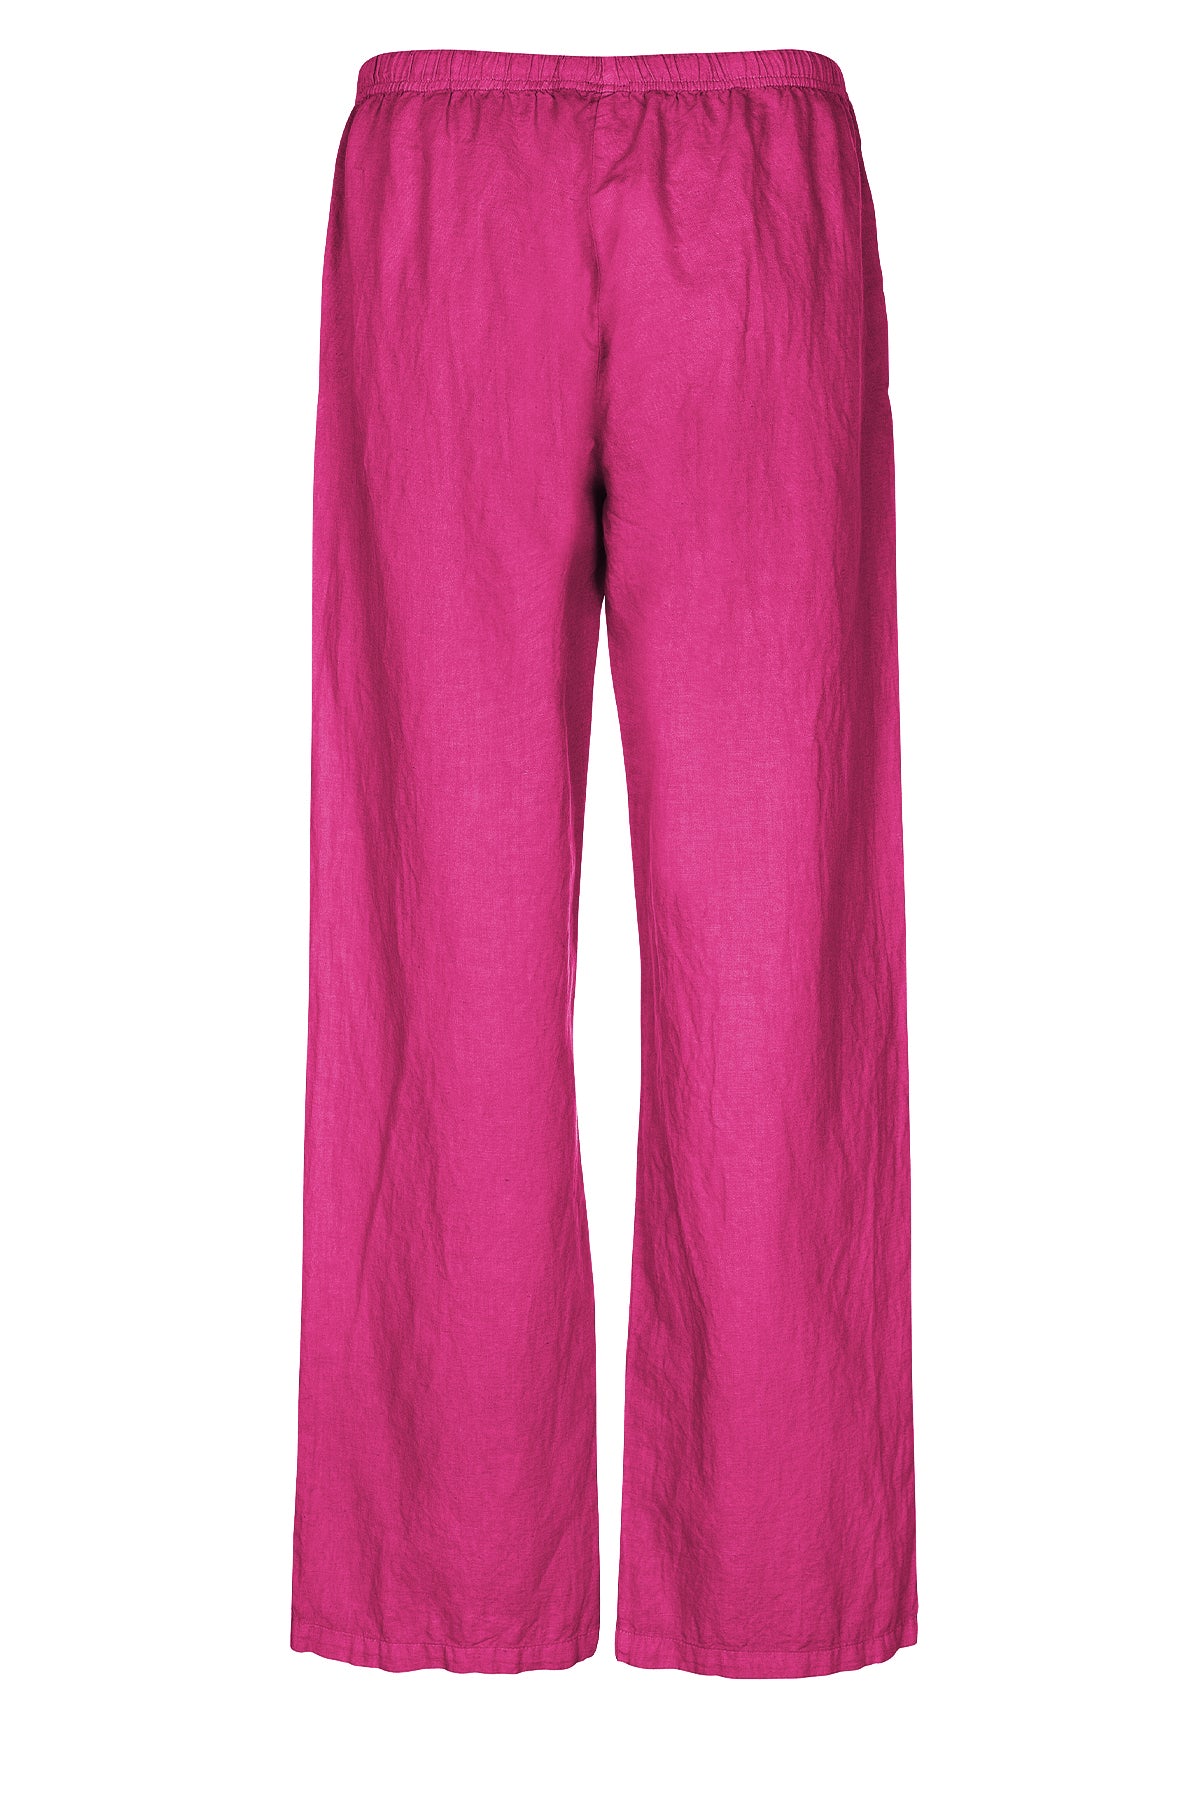 LUXZUZ // ONE TWO Elilin Pant Pant 324 Raspberry Rose